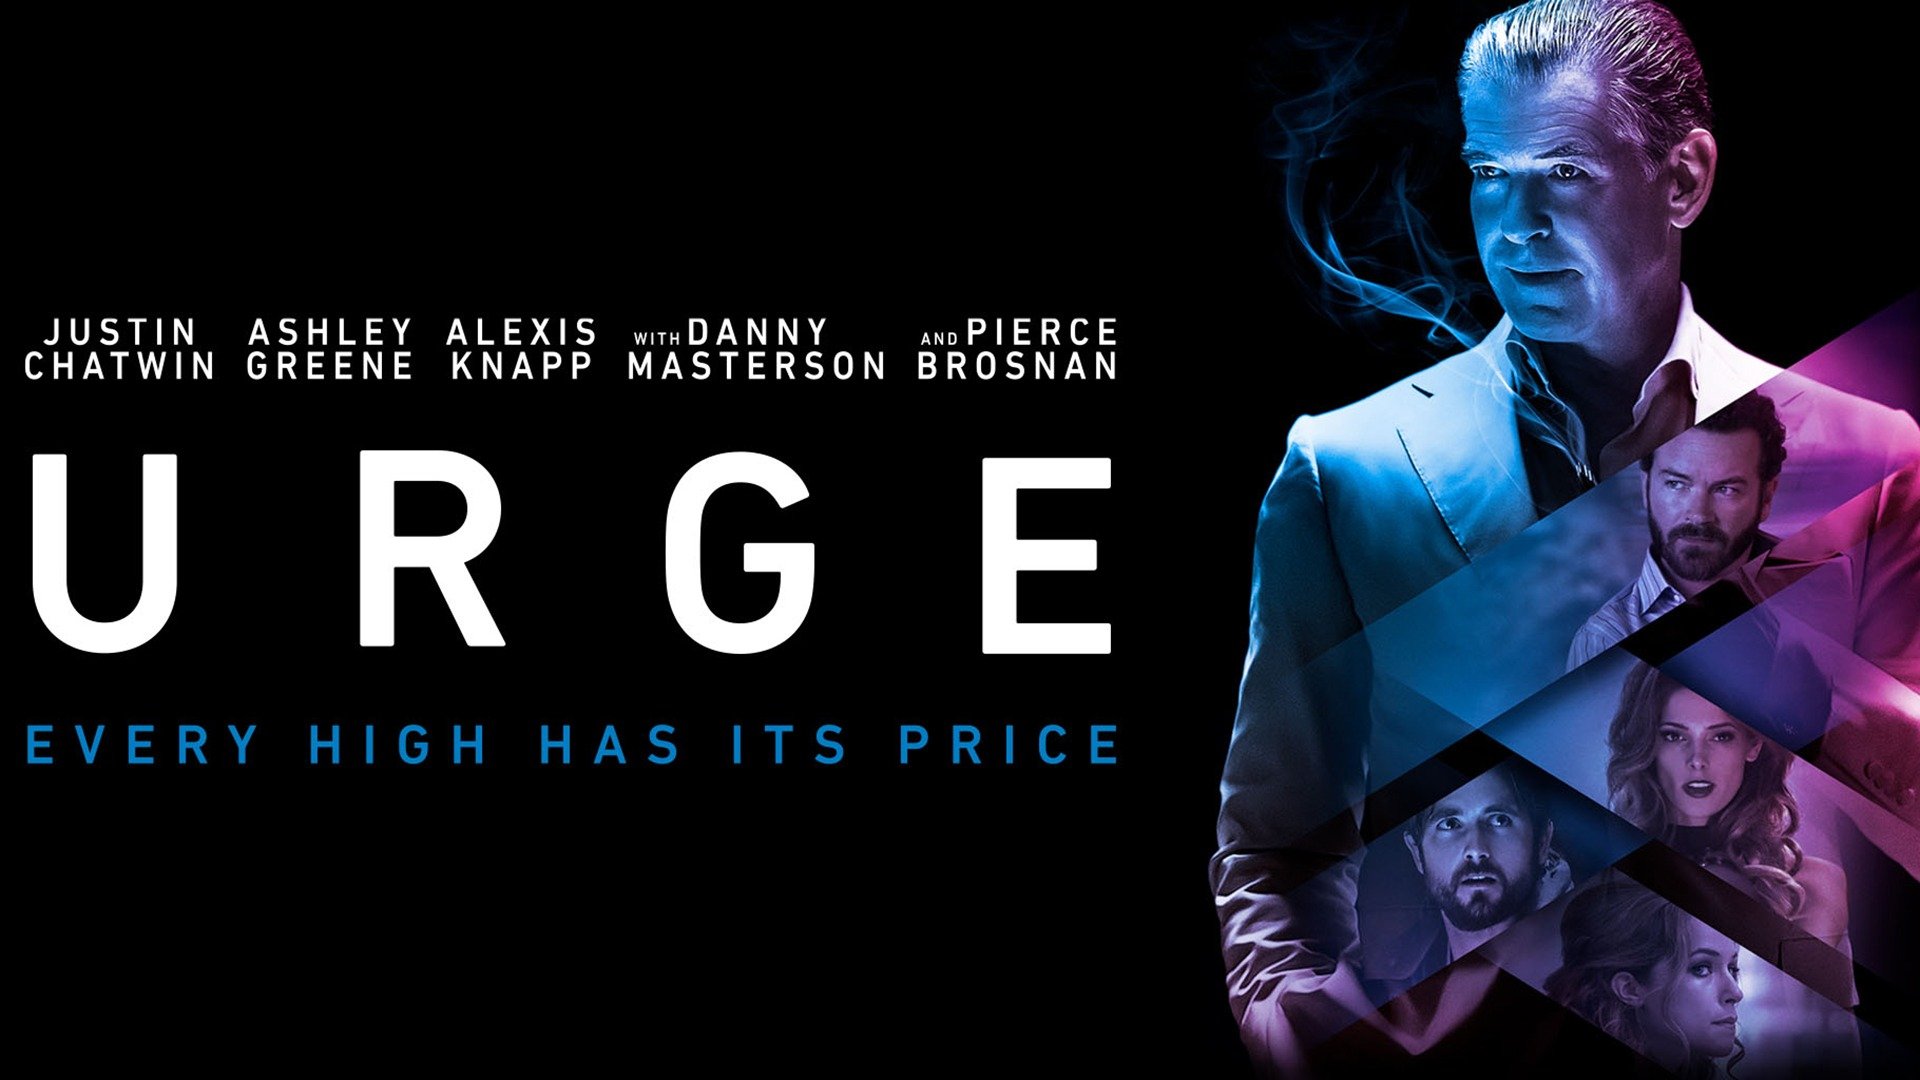 Urge Trailer 2 Trailers & Videos Rotten Tomatoes